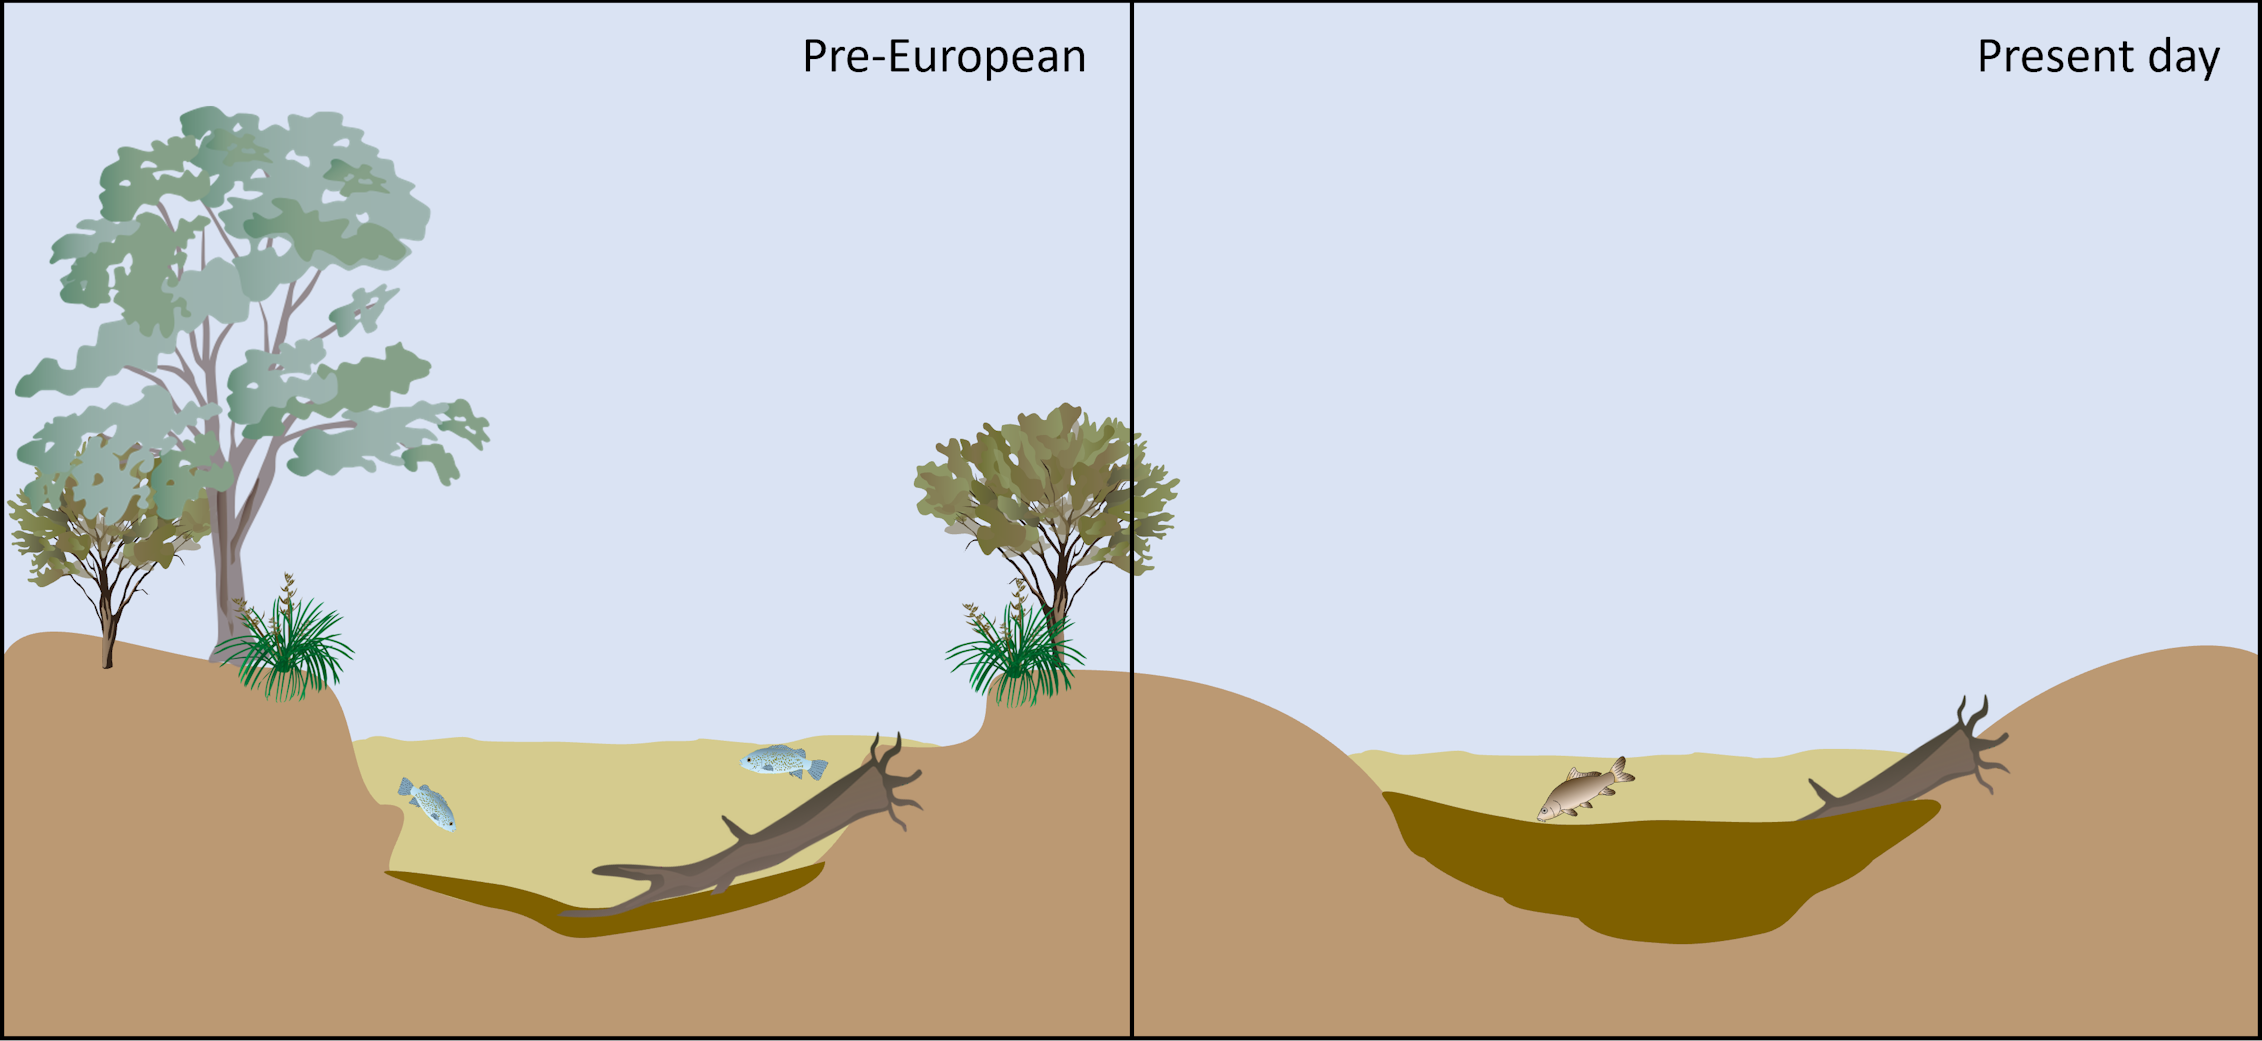 A cut-away graphic showing comparing the depth of waterholes before and after European settlement